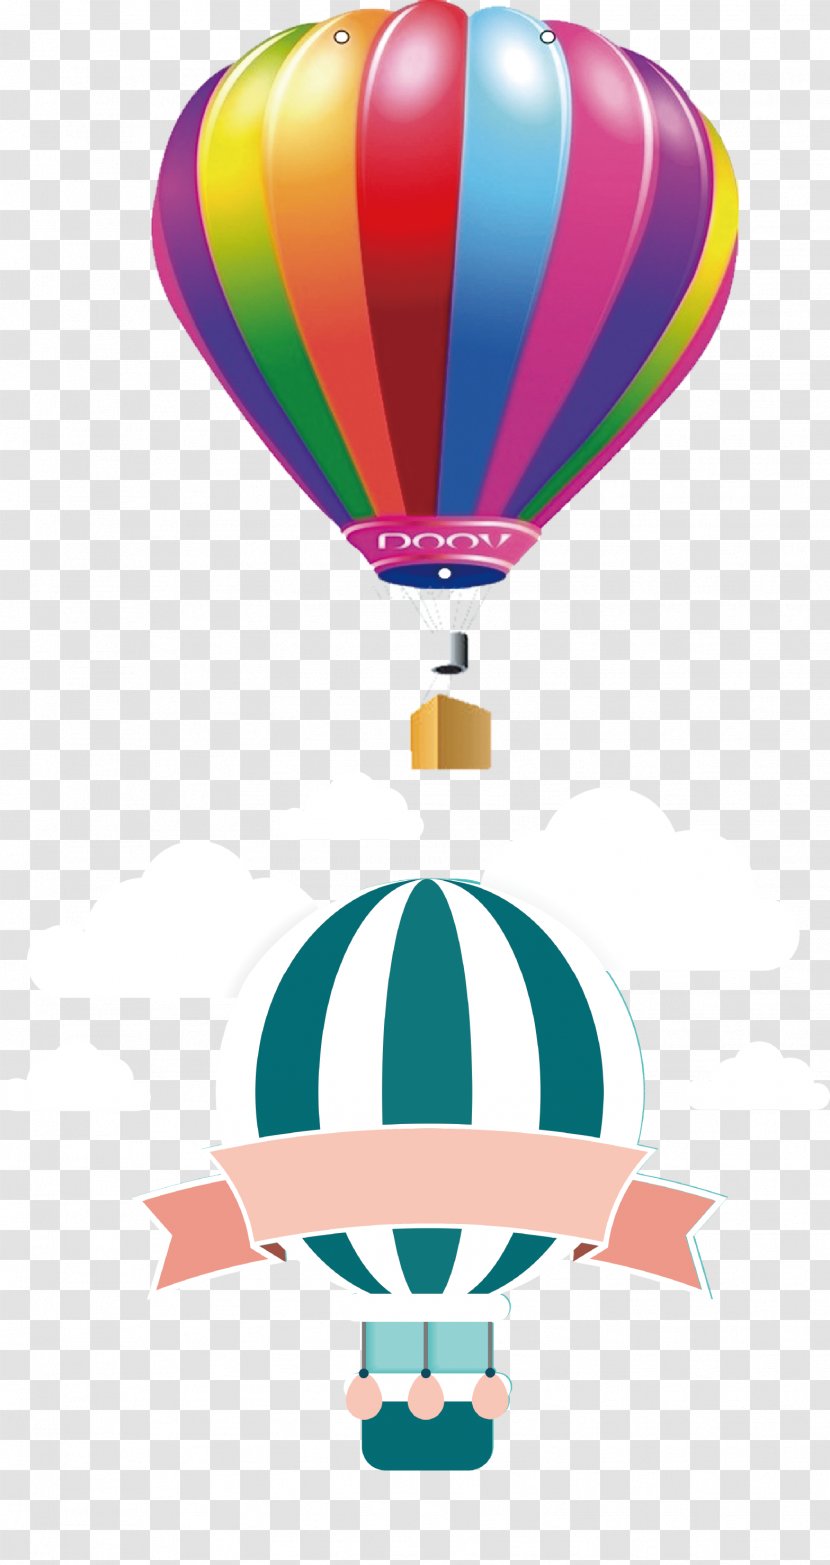 Balloon Basket Illustration - Hot Air Ballooning - The Parachute Is Beautifully Decorated And Patterned Transparent PNG